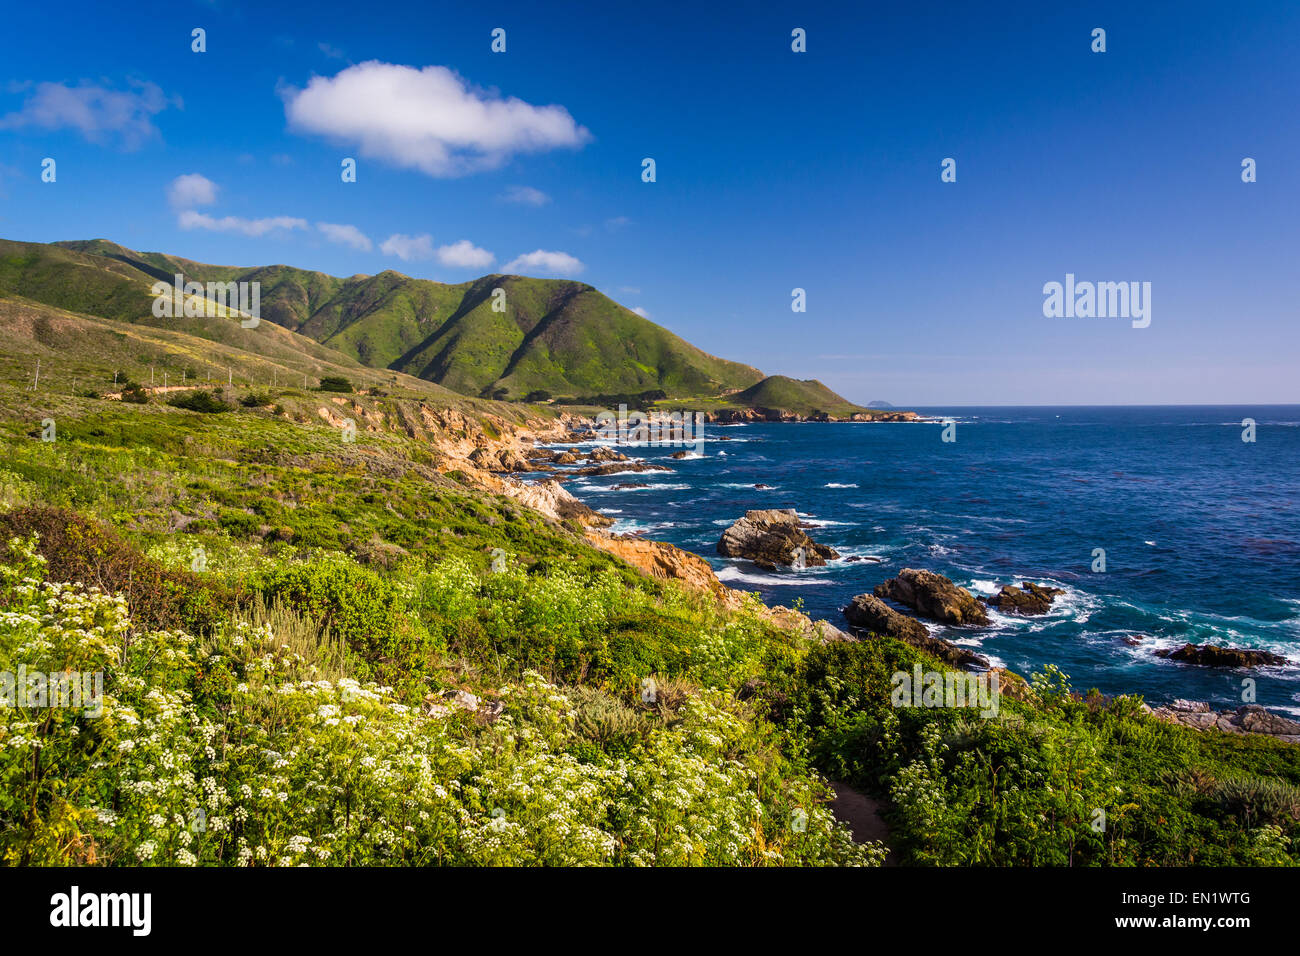 View of the Pacific Coast at Garrapata State Park, California. Stock Photo